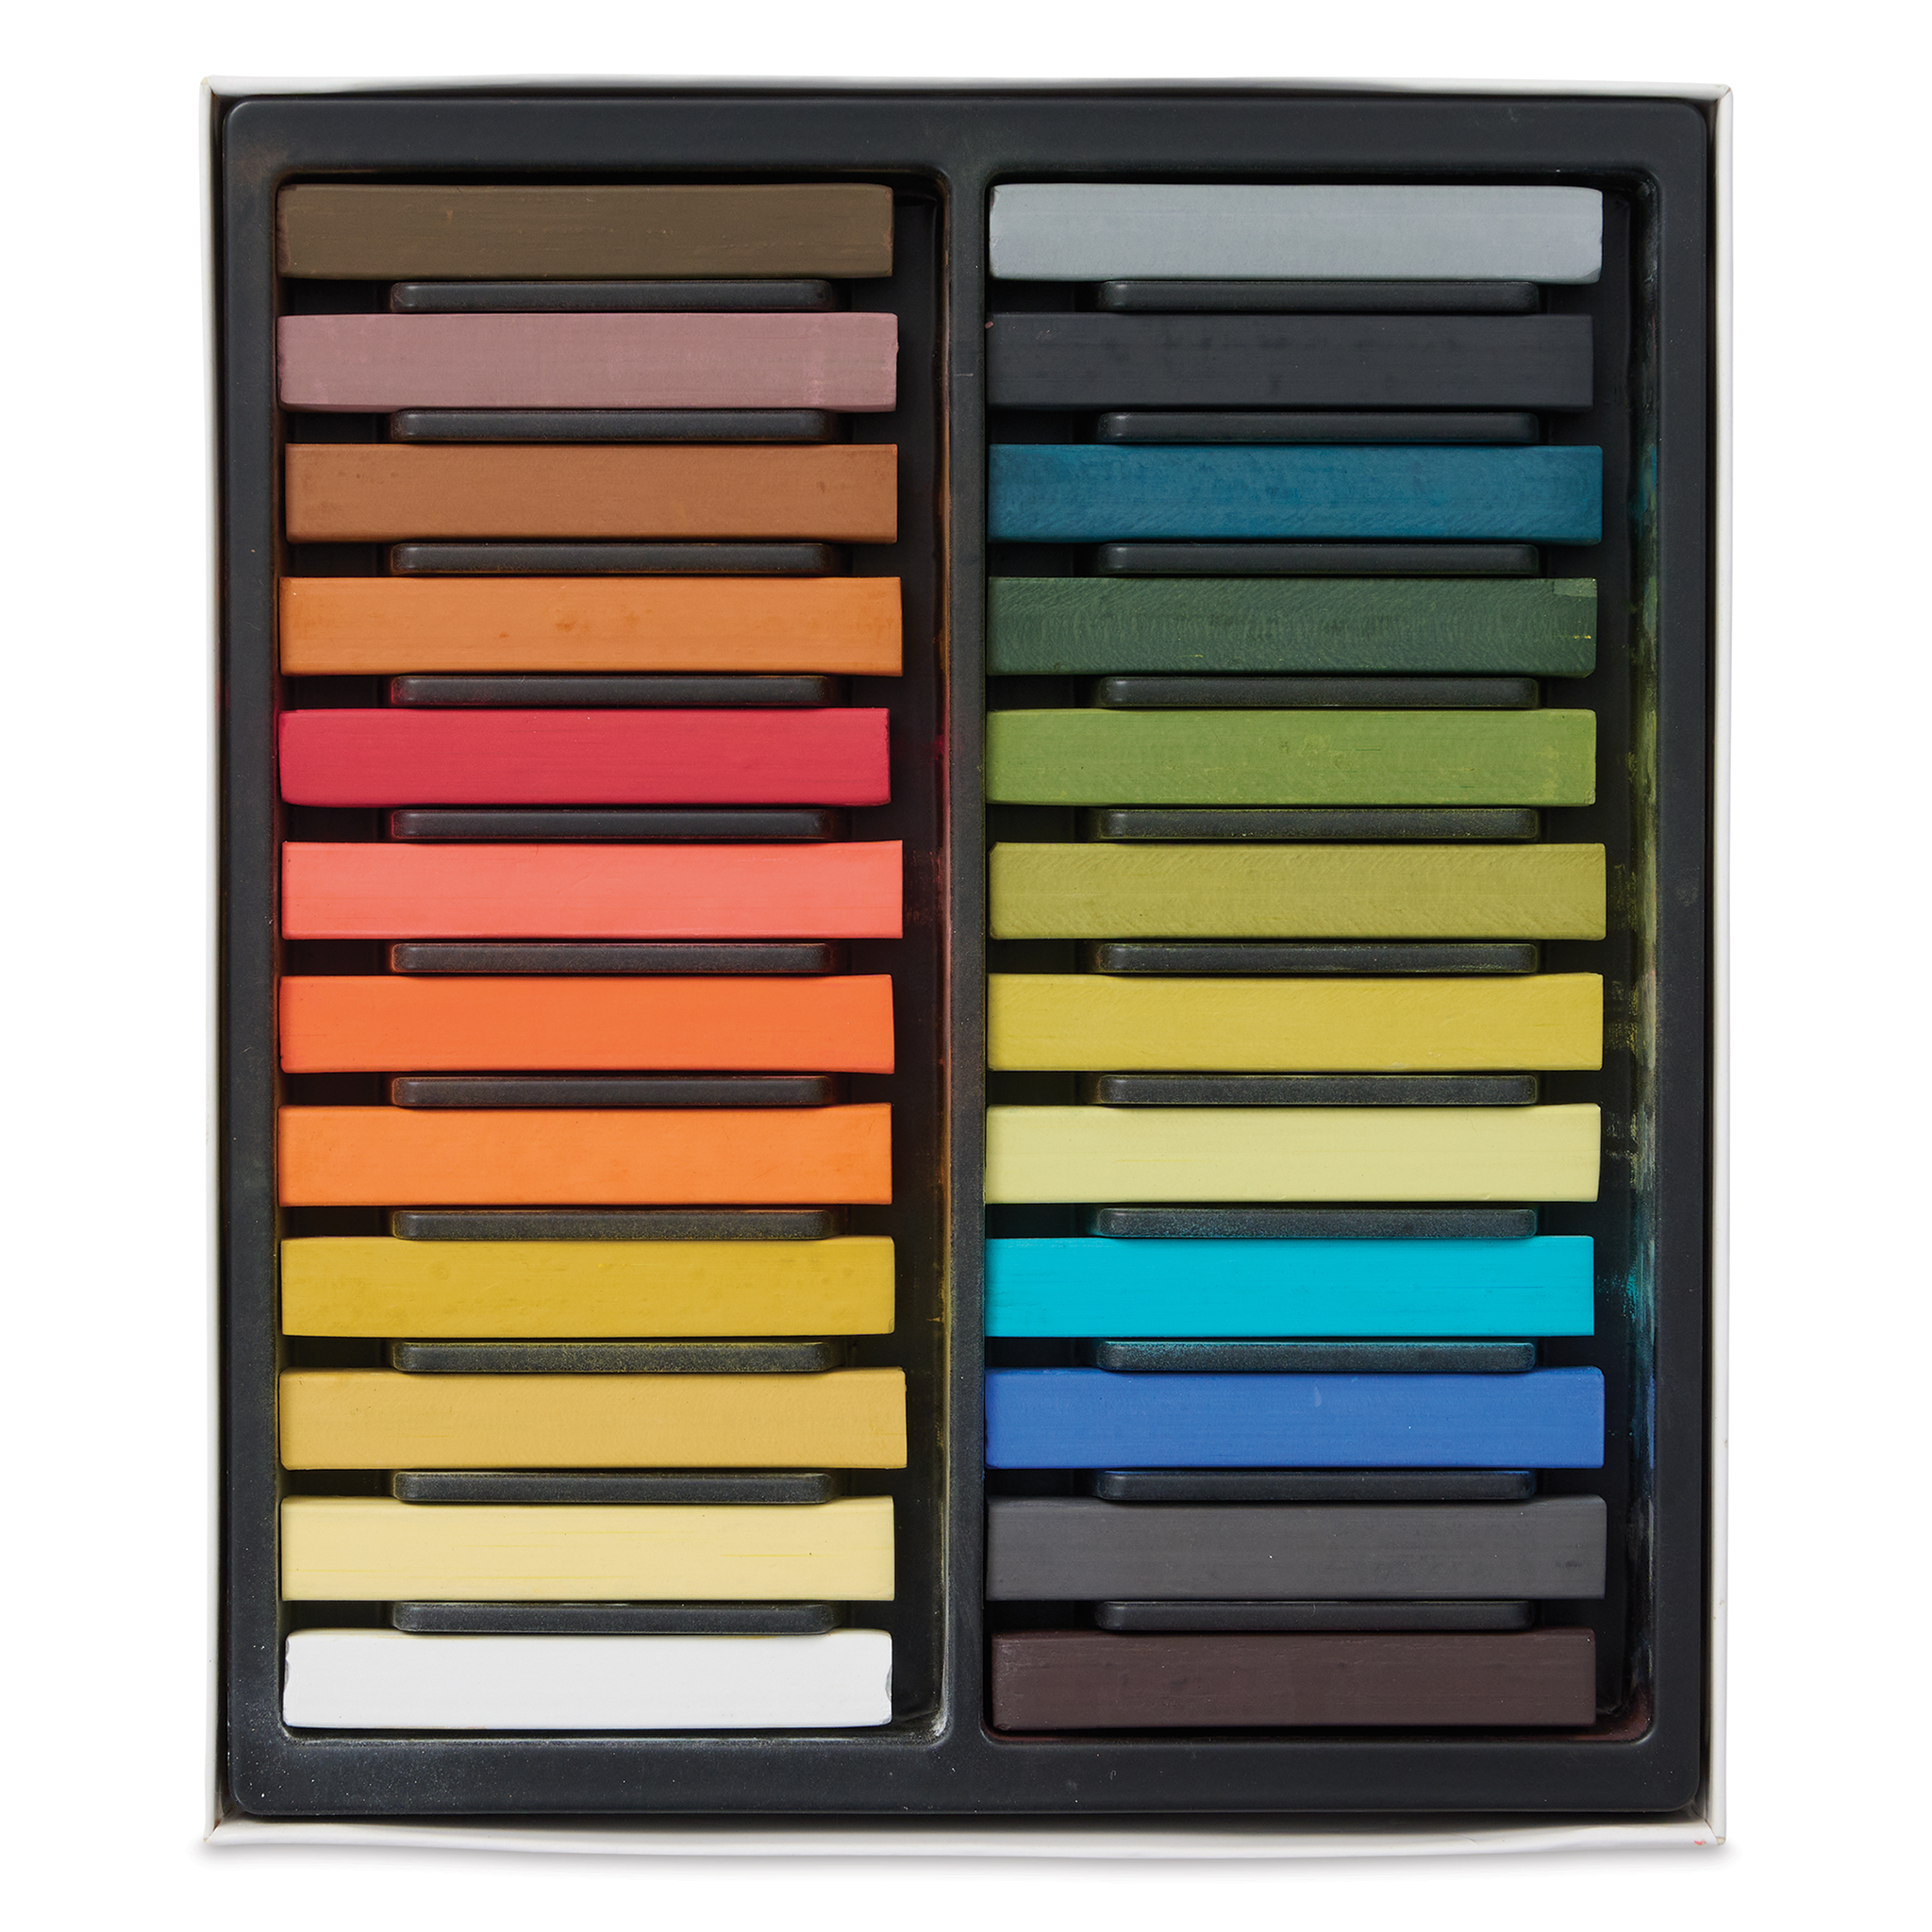 Soft Pastels Art Supplies Set of 24 Colored Chalk Pastels for